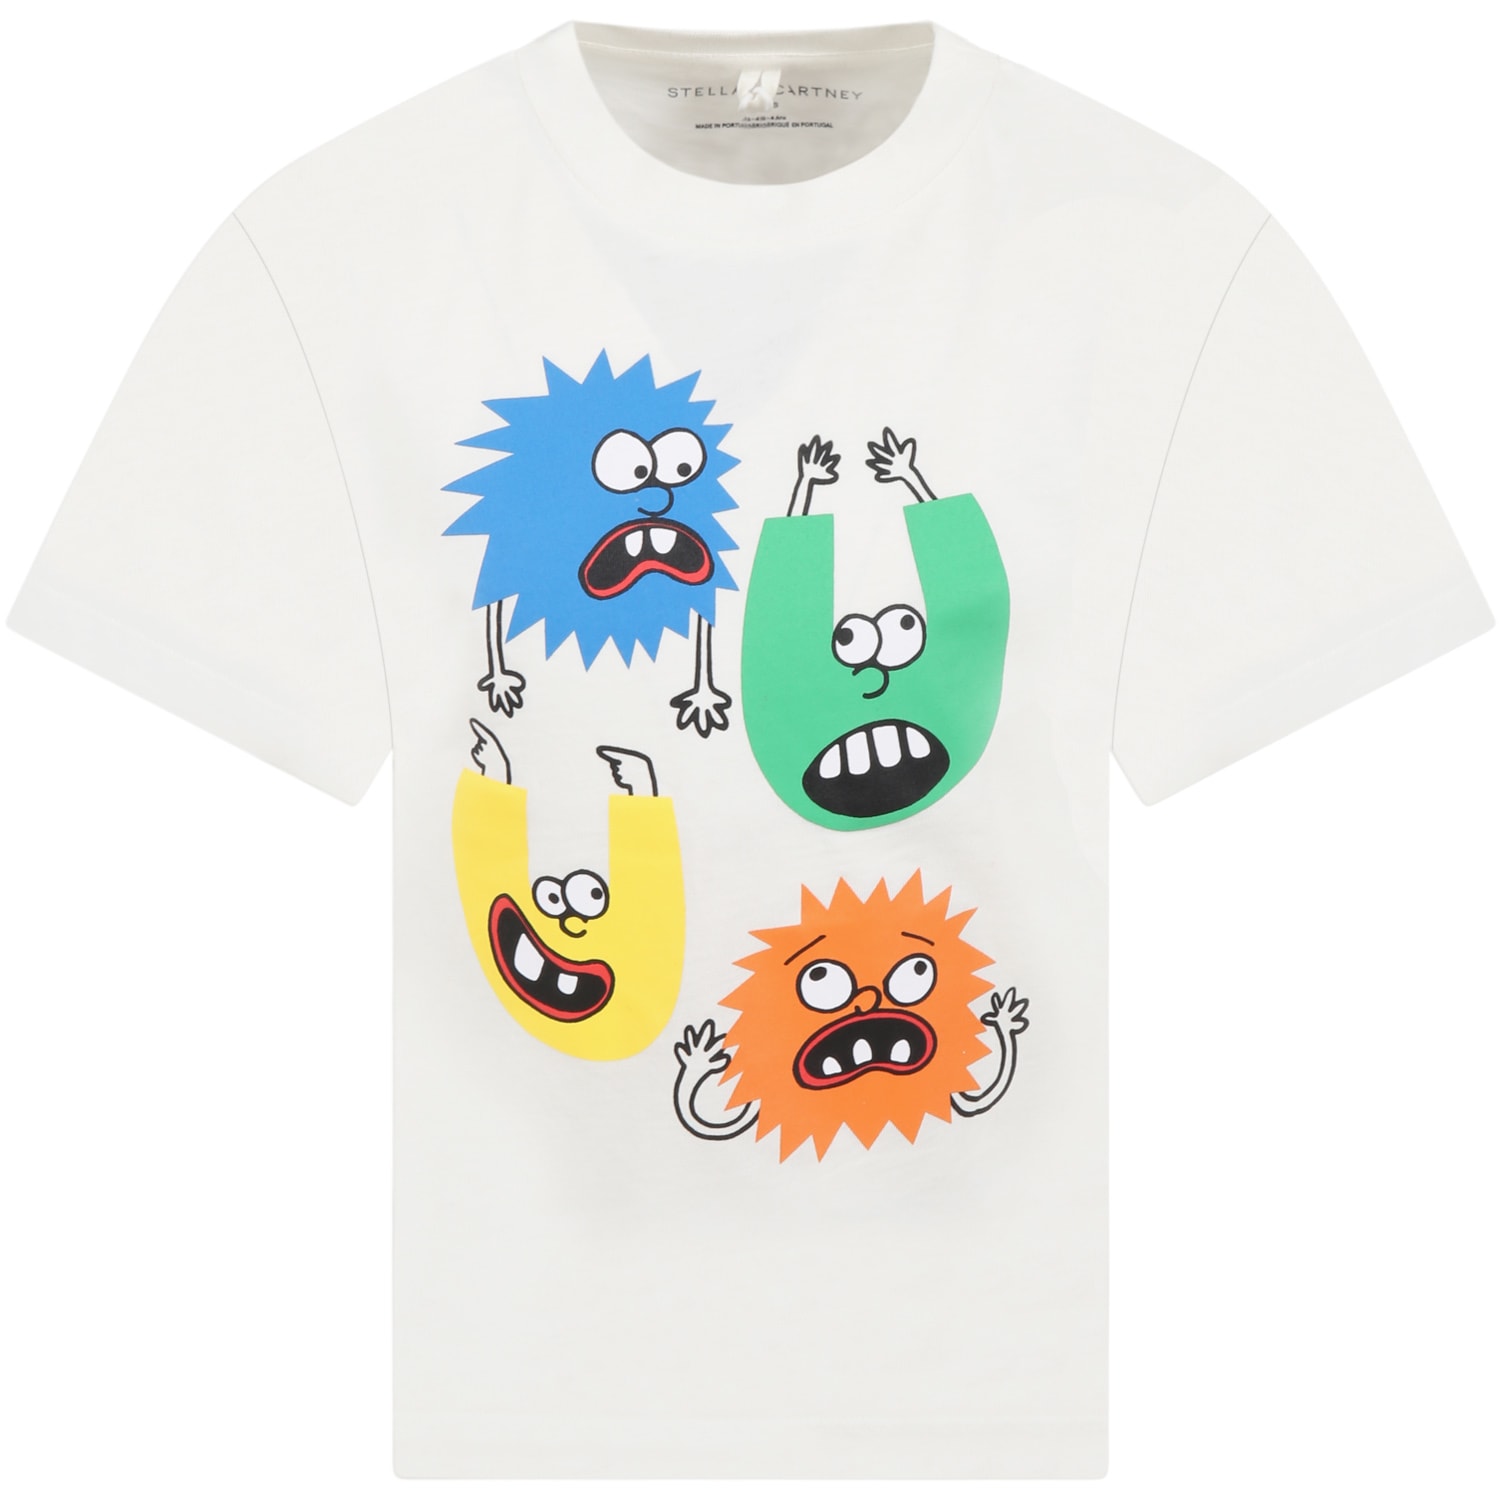 STELLA MCCARTNEY WHITE T-SHIRT FOR BOY WITH COLORFUL DESIGNS